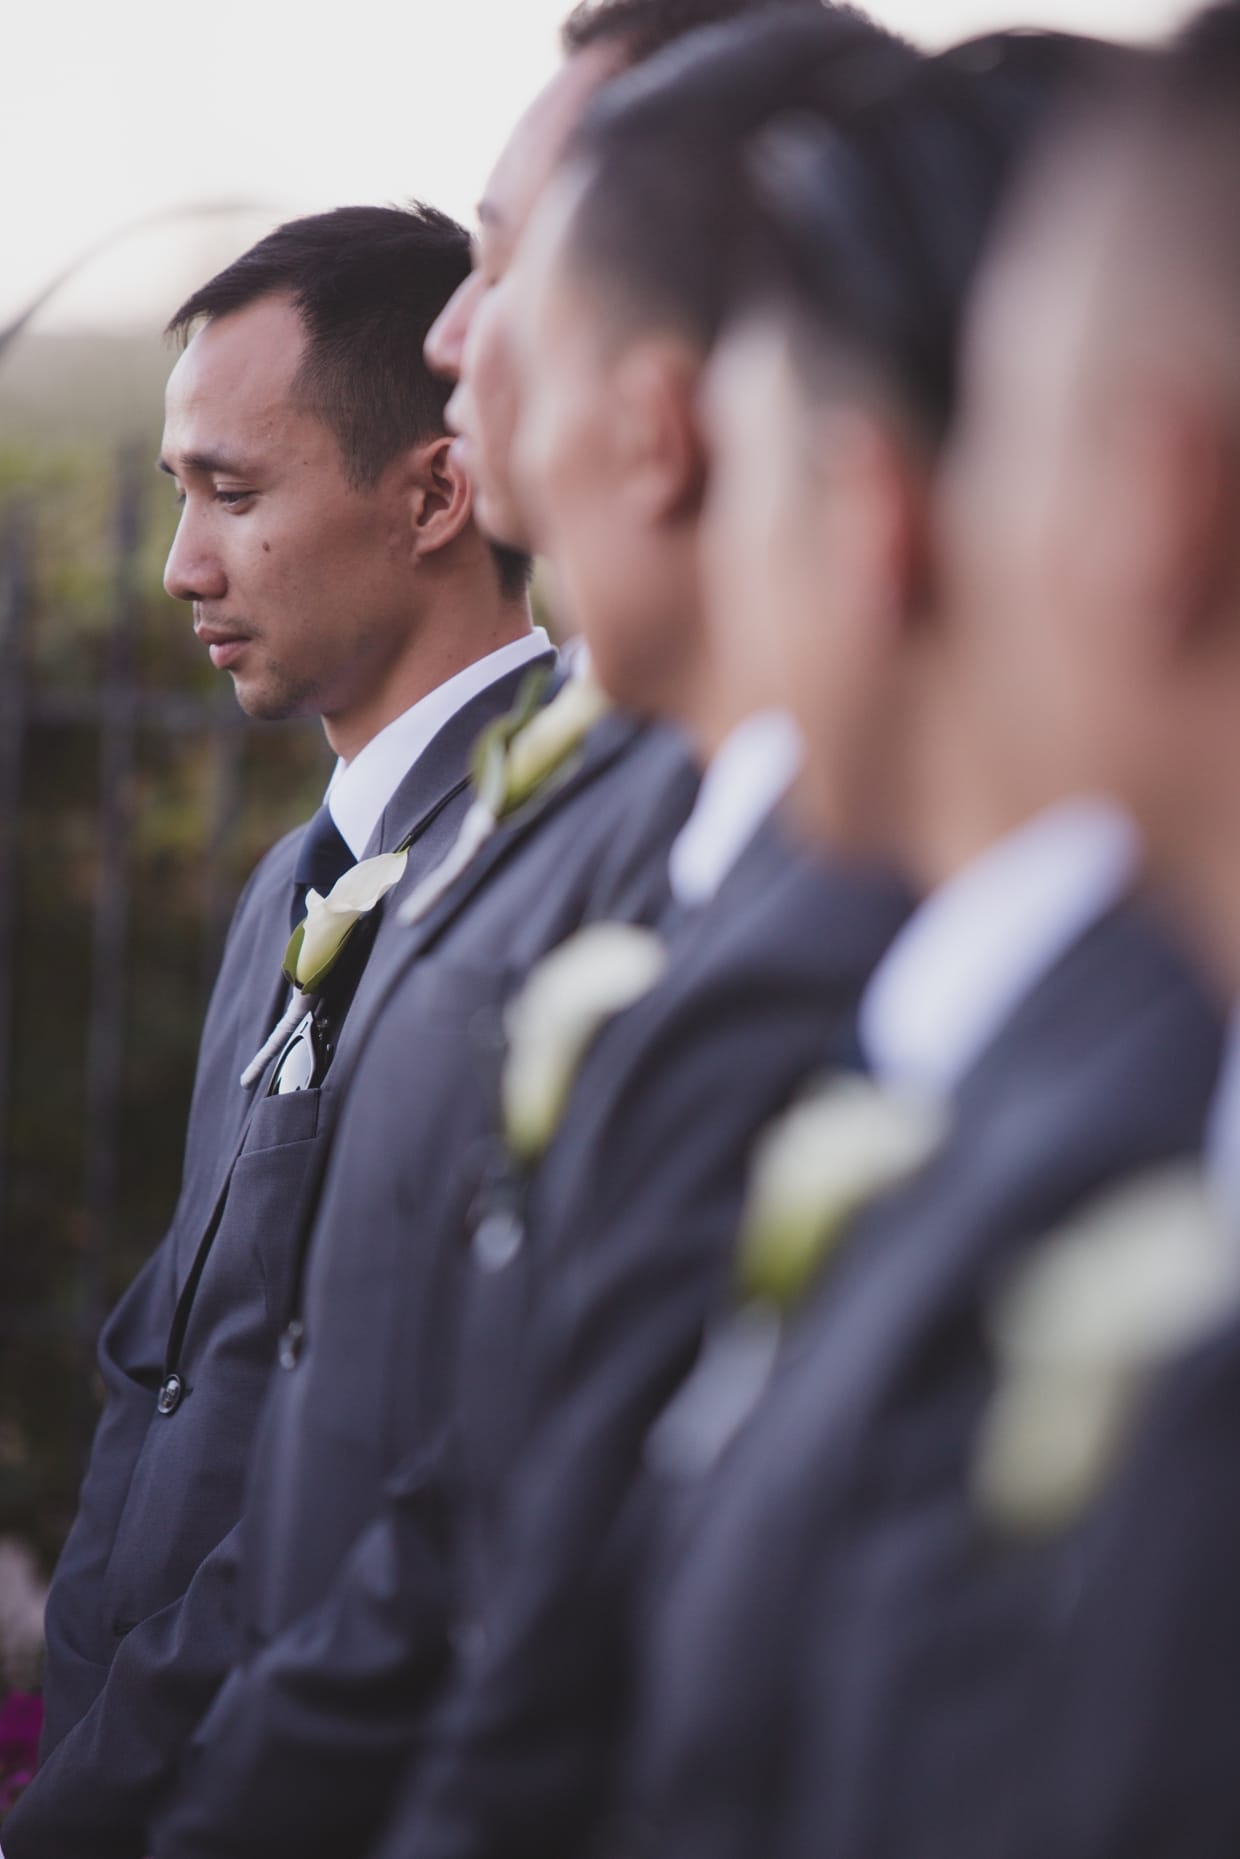 An artistic photograph of the groomsmen during a wedding ceremony at the Boston Marriott Hotel